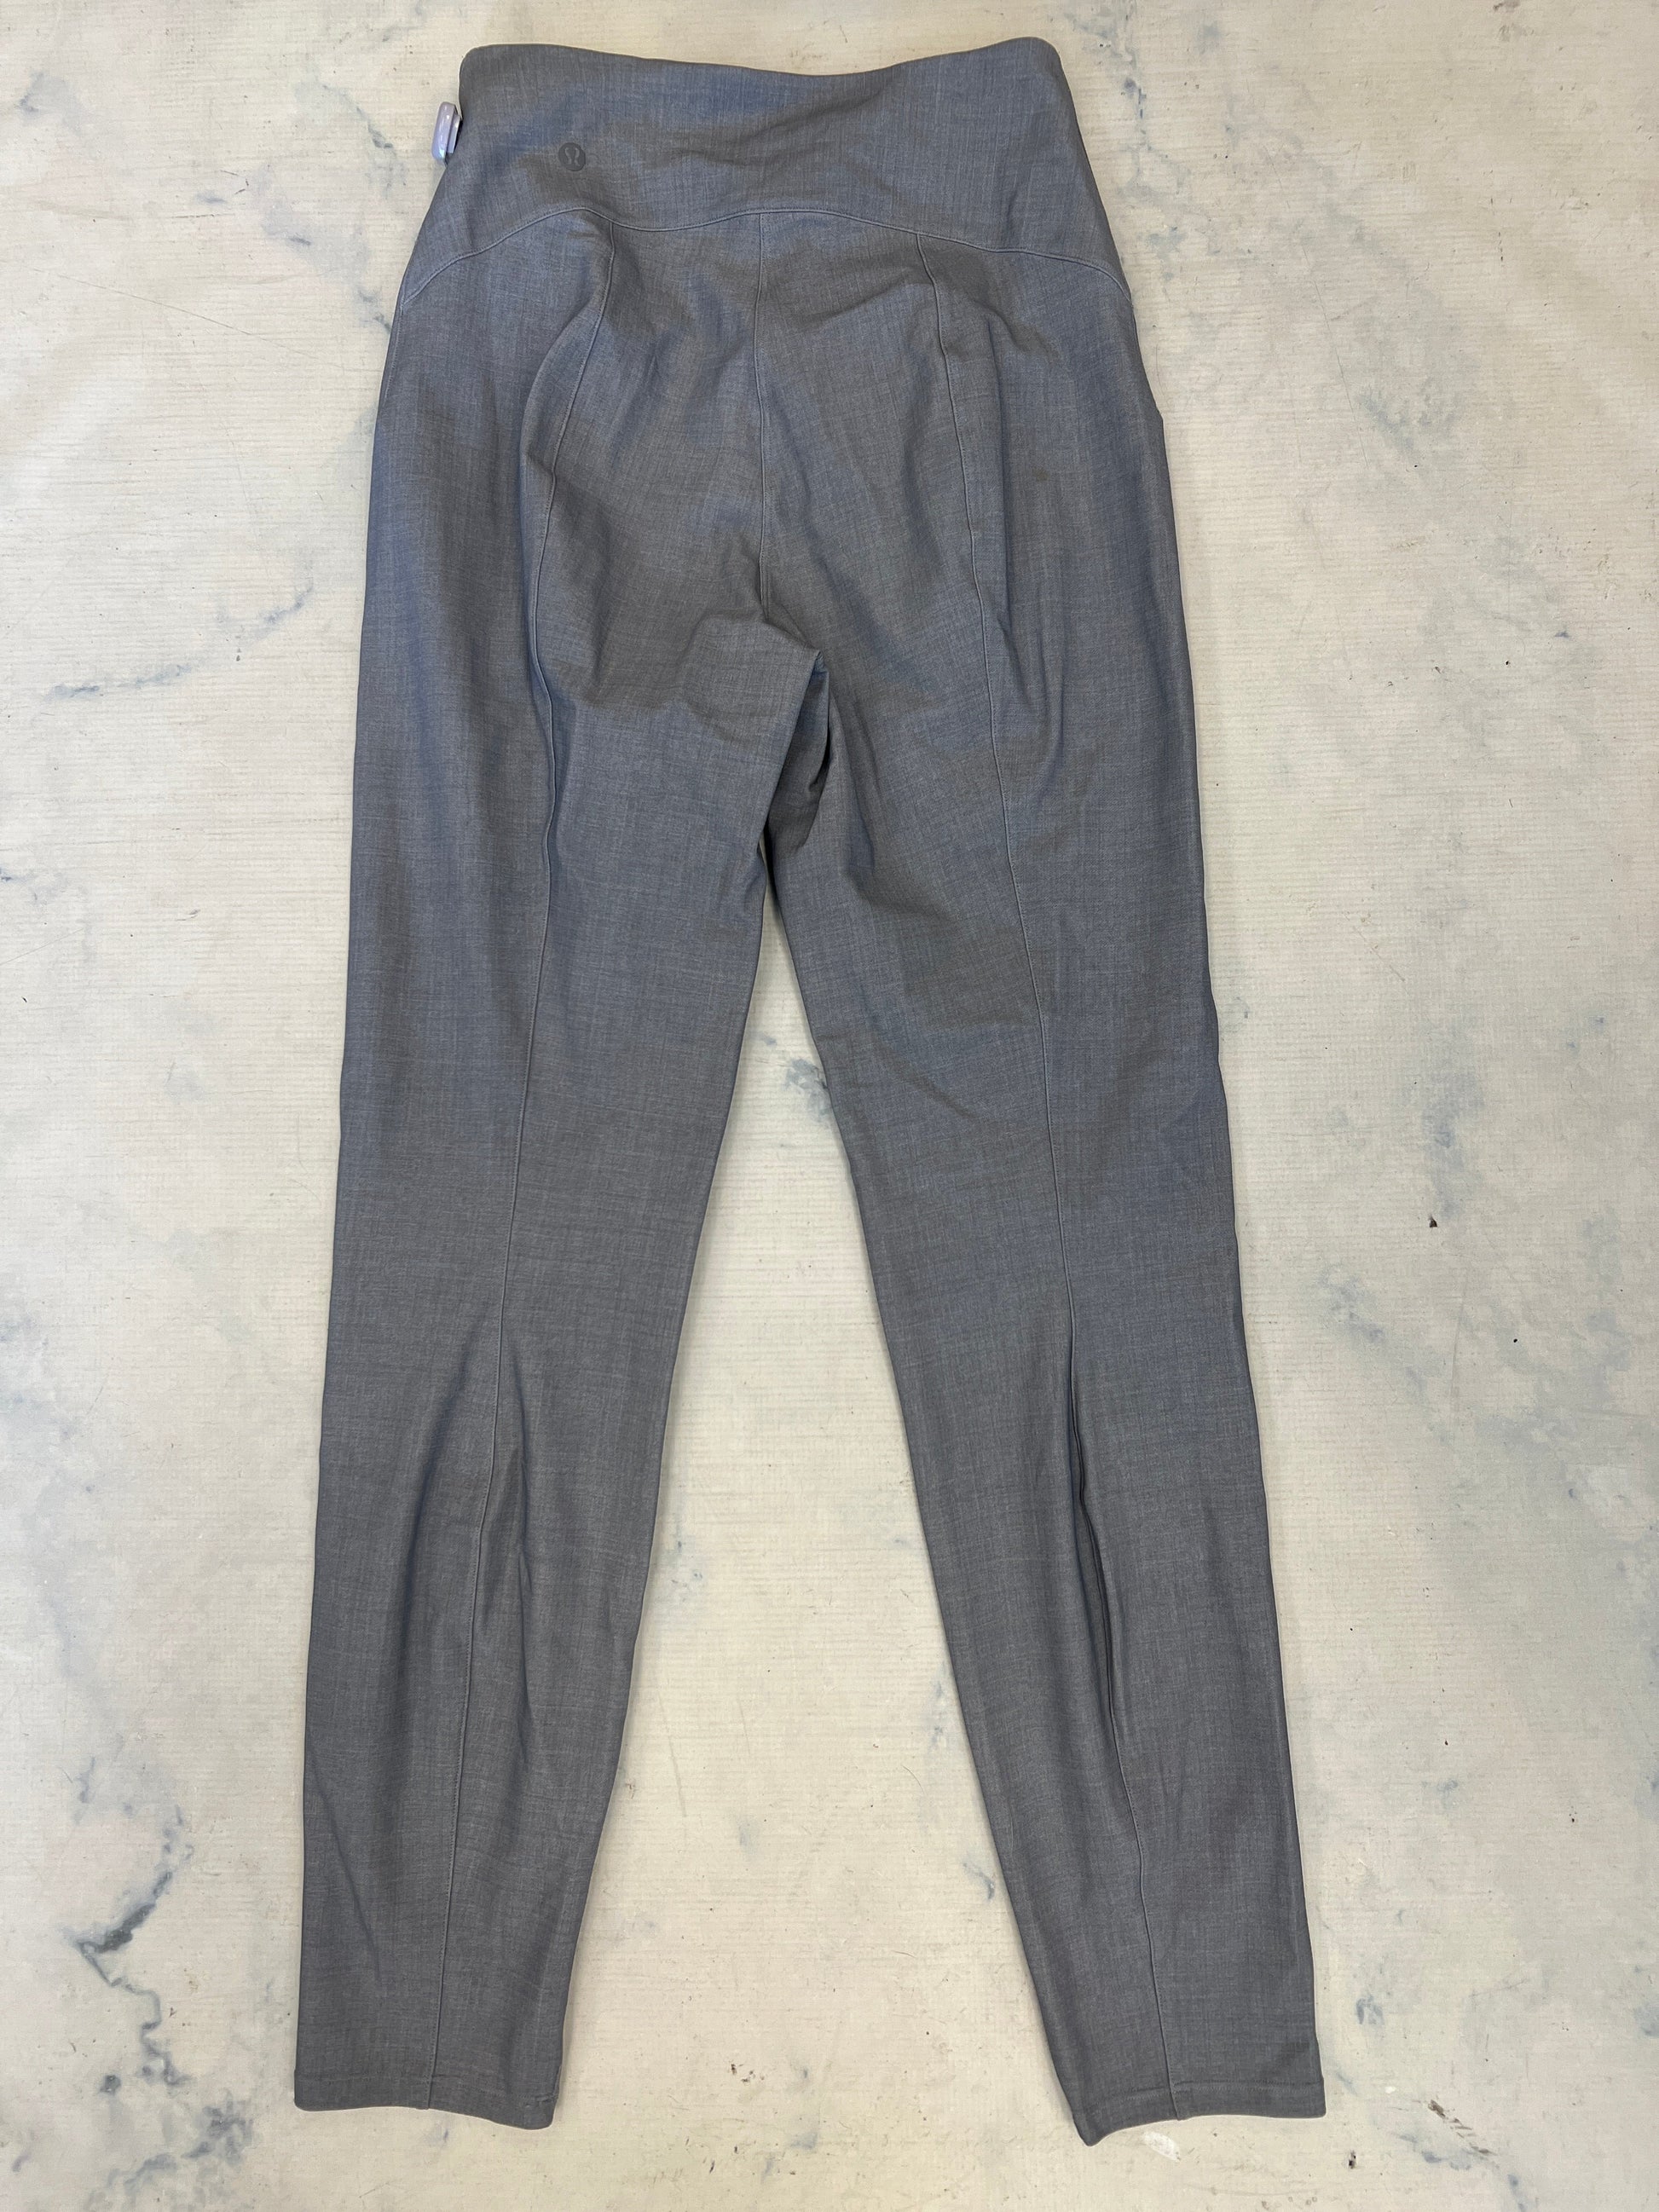 Pants Ankle By Lululemon Size: 6